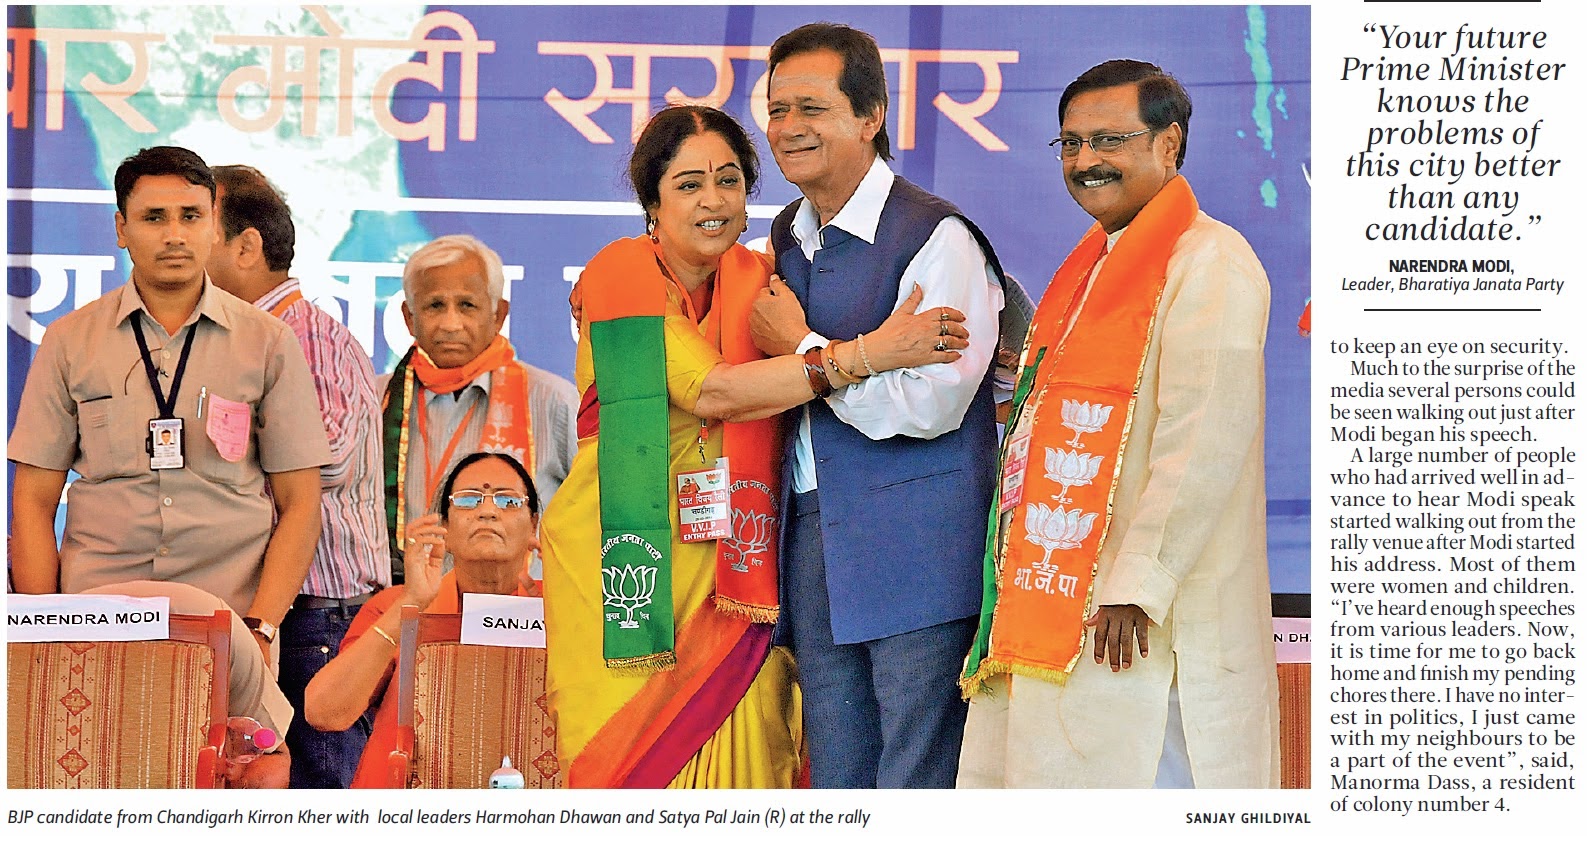 BJP candidate from Chandigarh Kirron Kher with Harmohan Dhawan & Satya Pal Jain at the rally